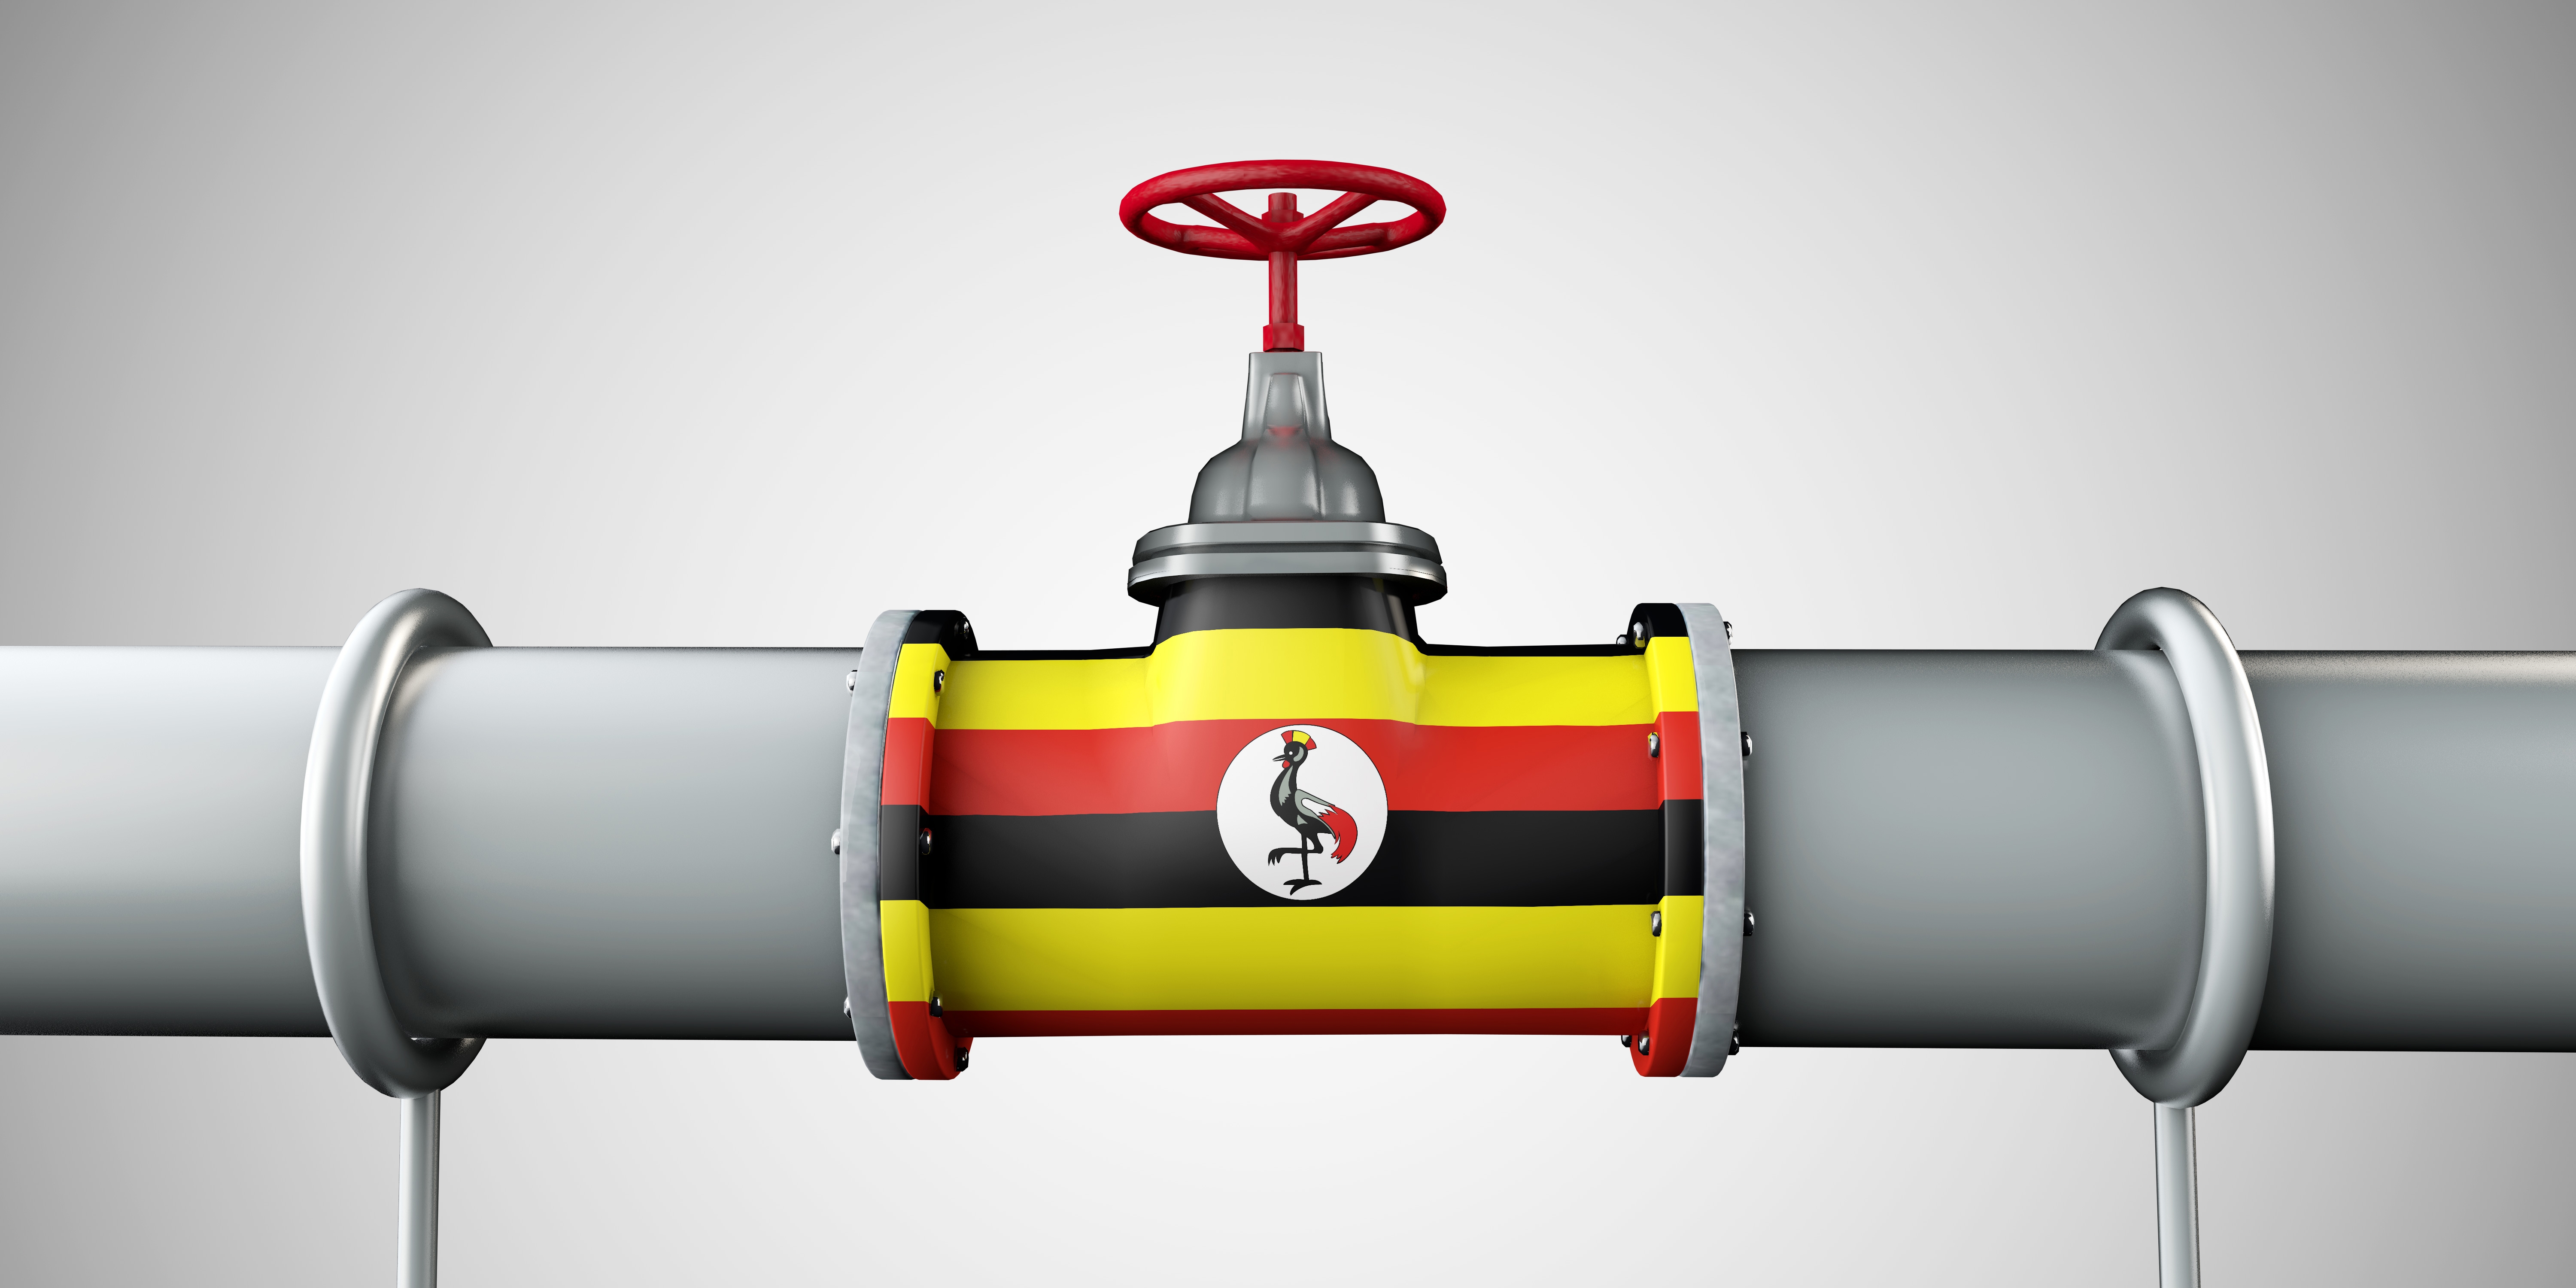 Oil pipeline with Uganda flag representing part of the Africa Energy Market.